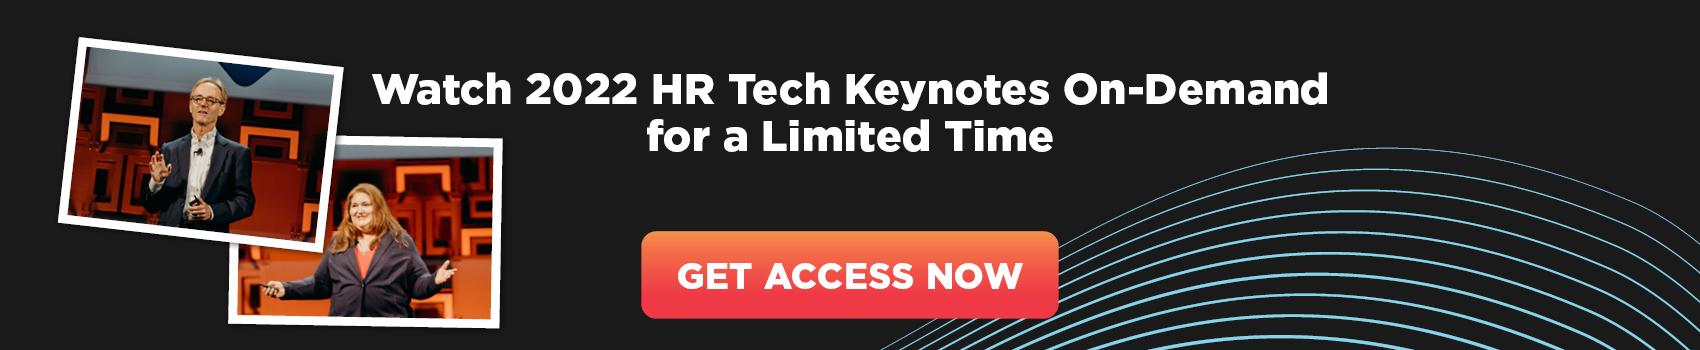 Watch 2022 HR Tech Keynotes On-Demand for a Limited Time Get Access Now